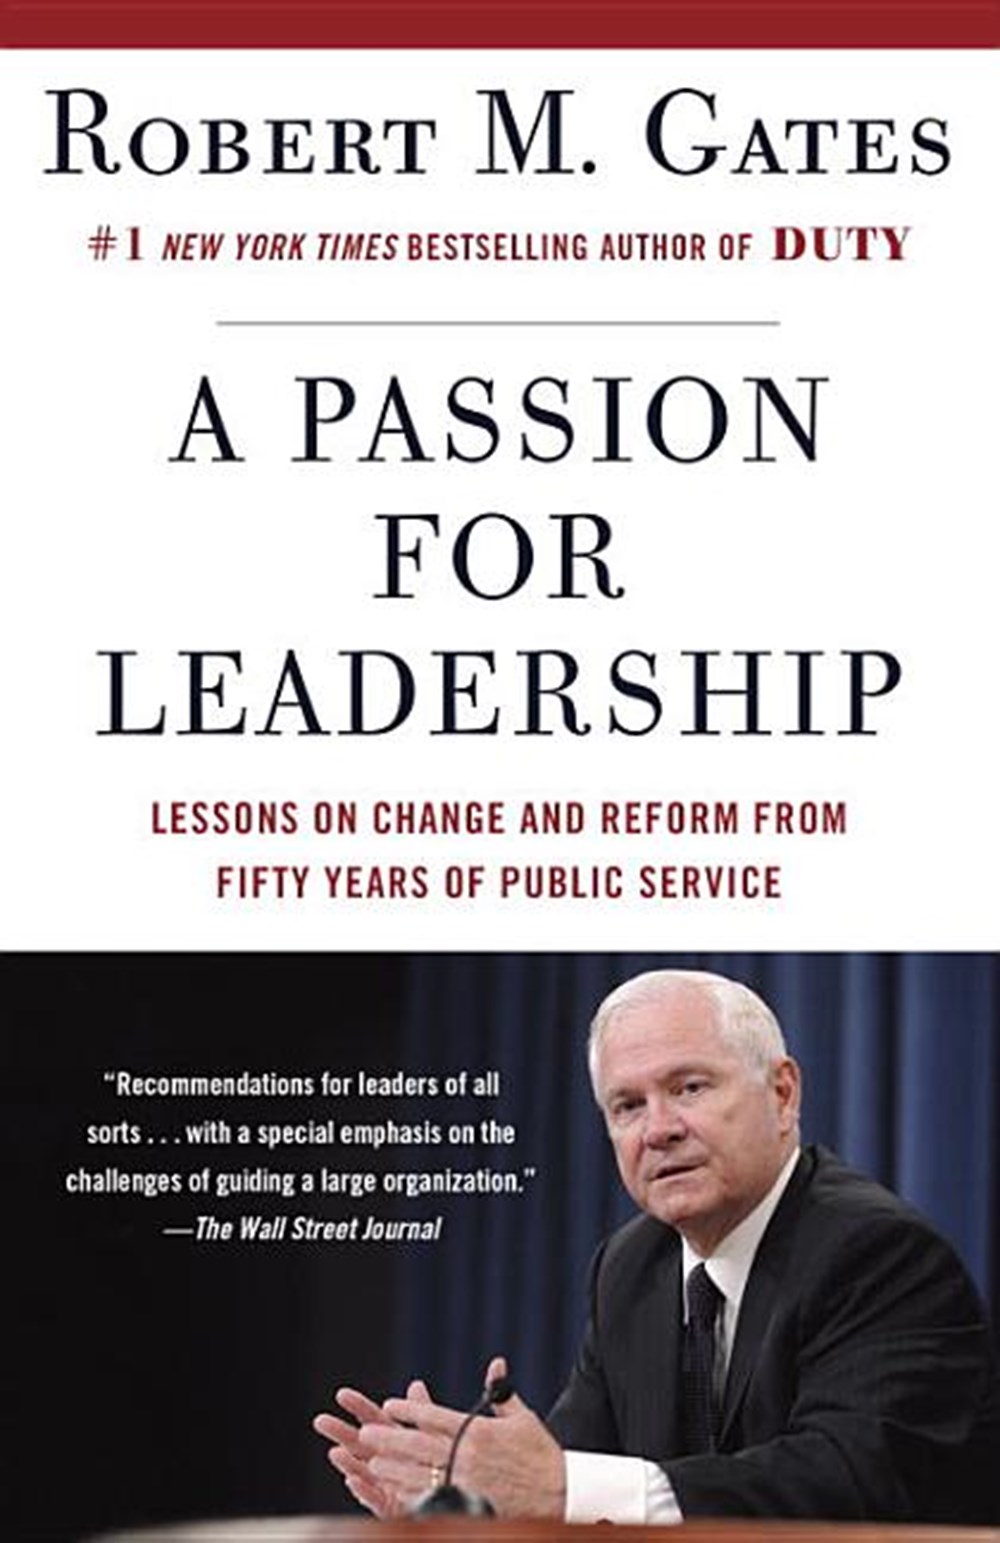 Passion for Leadership Lessons on Change and Reform from Fifty Years of Public Service